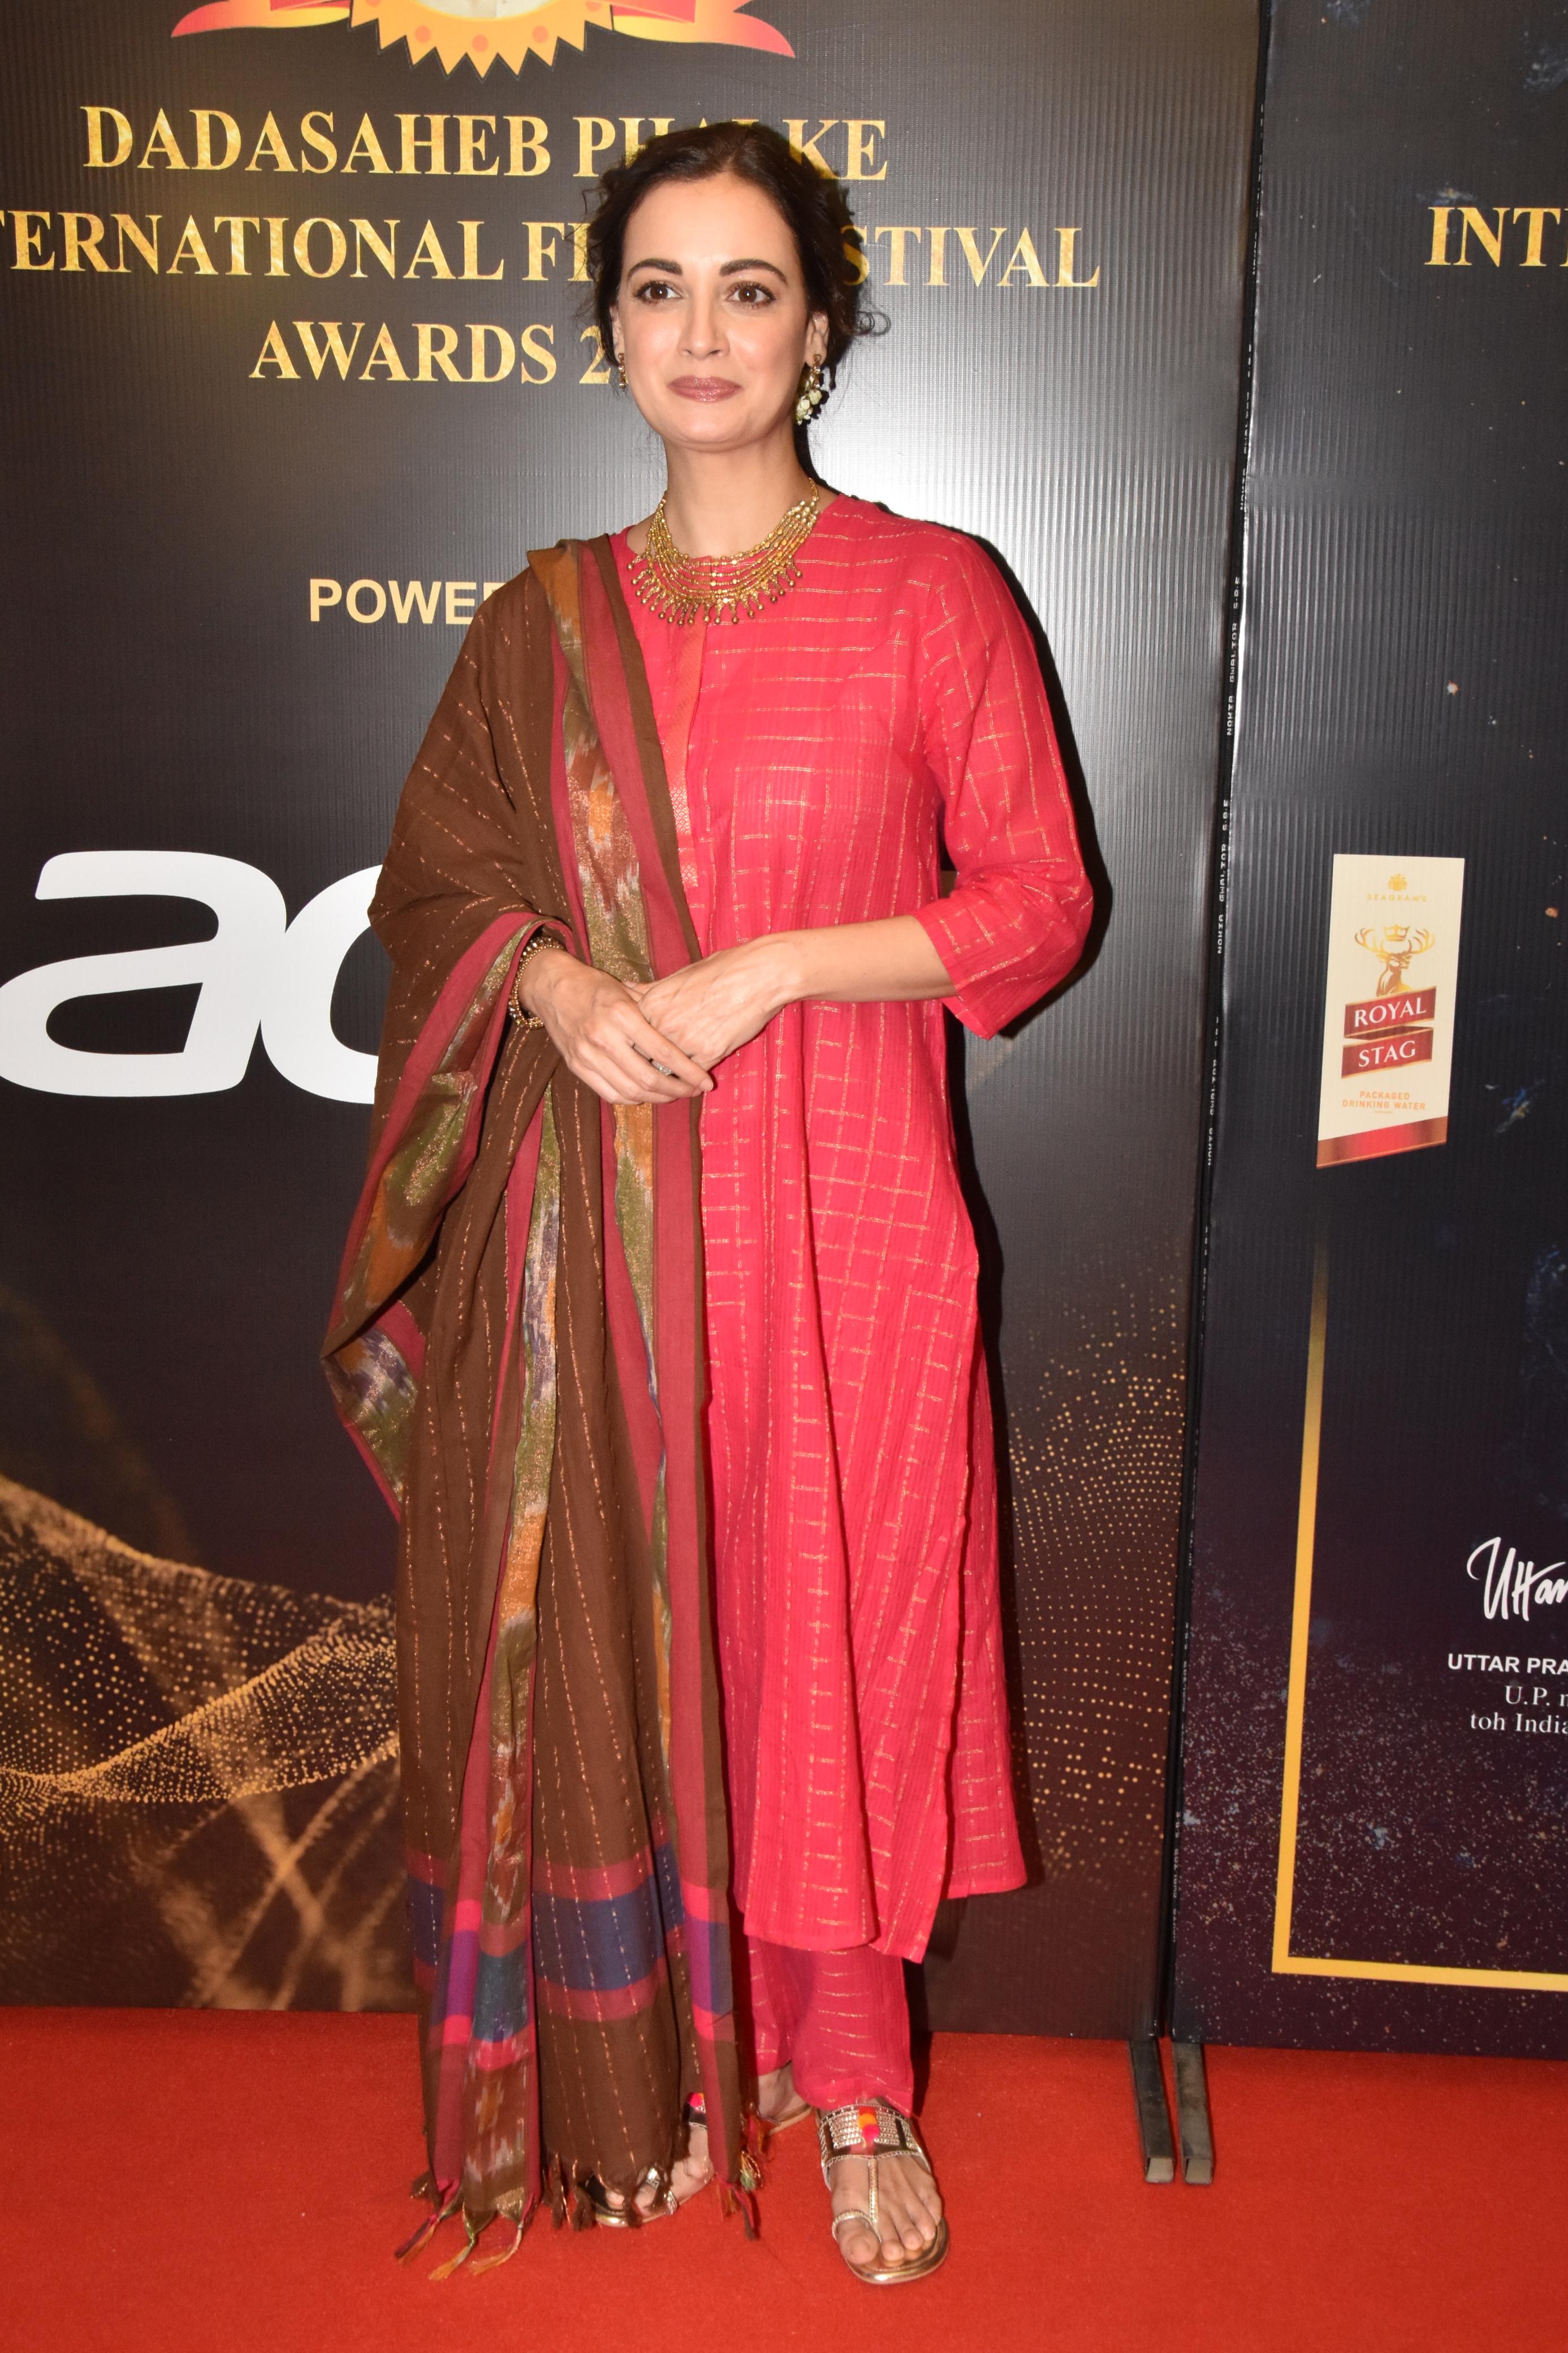 Dia Mirza donned her ethnic best as she posed for the cameras at the same event